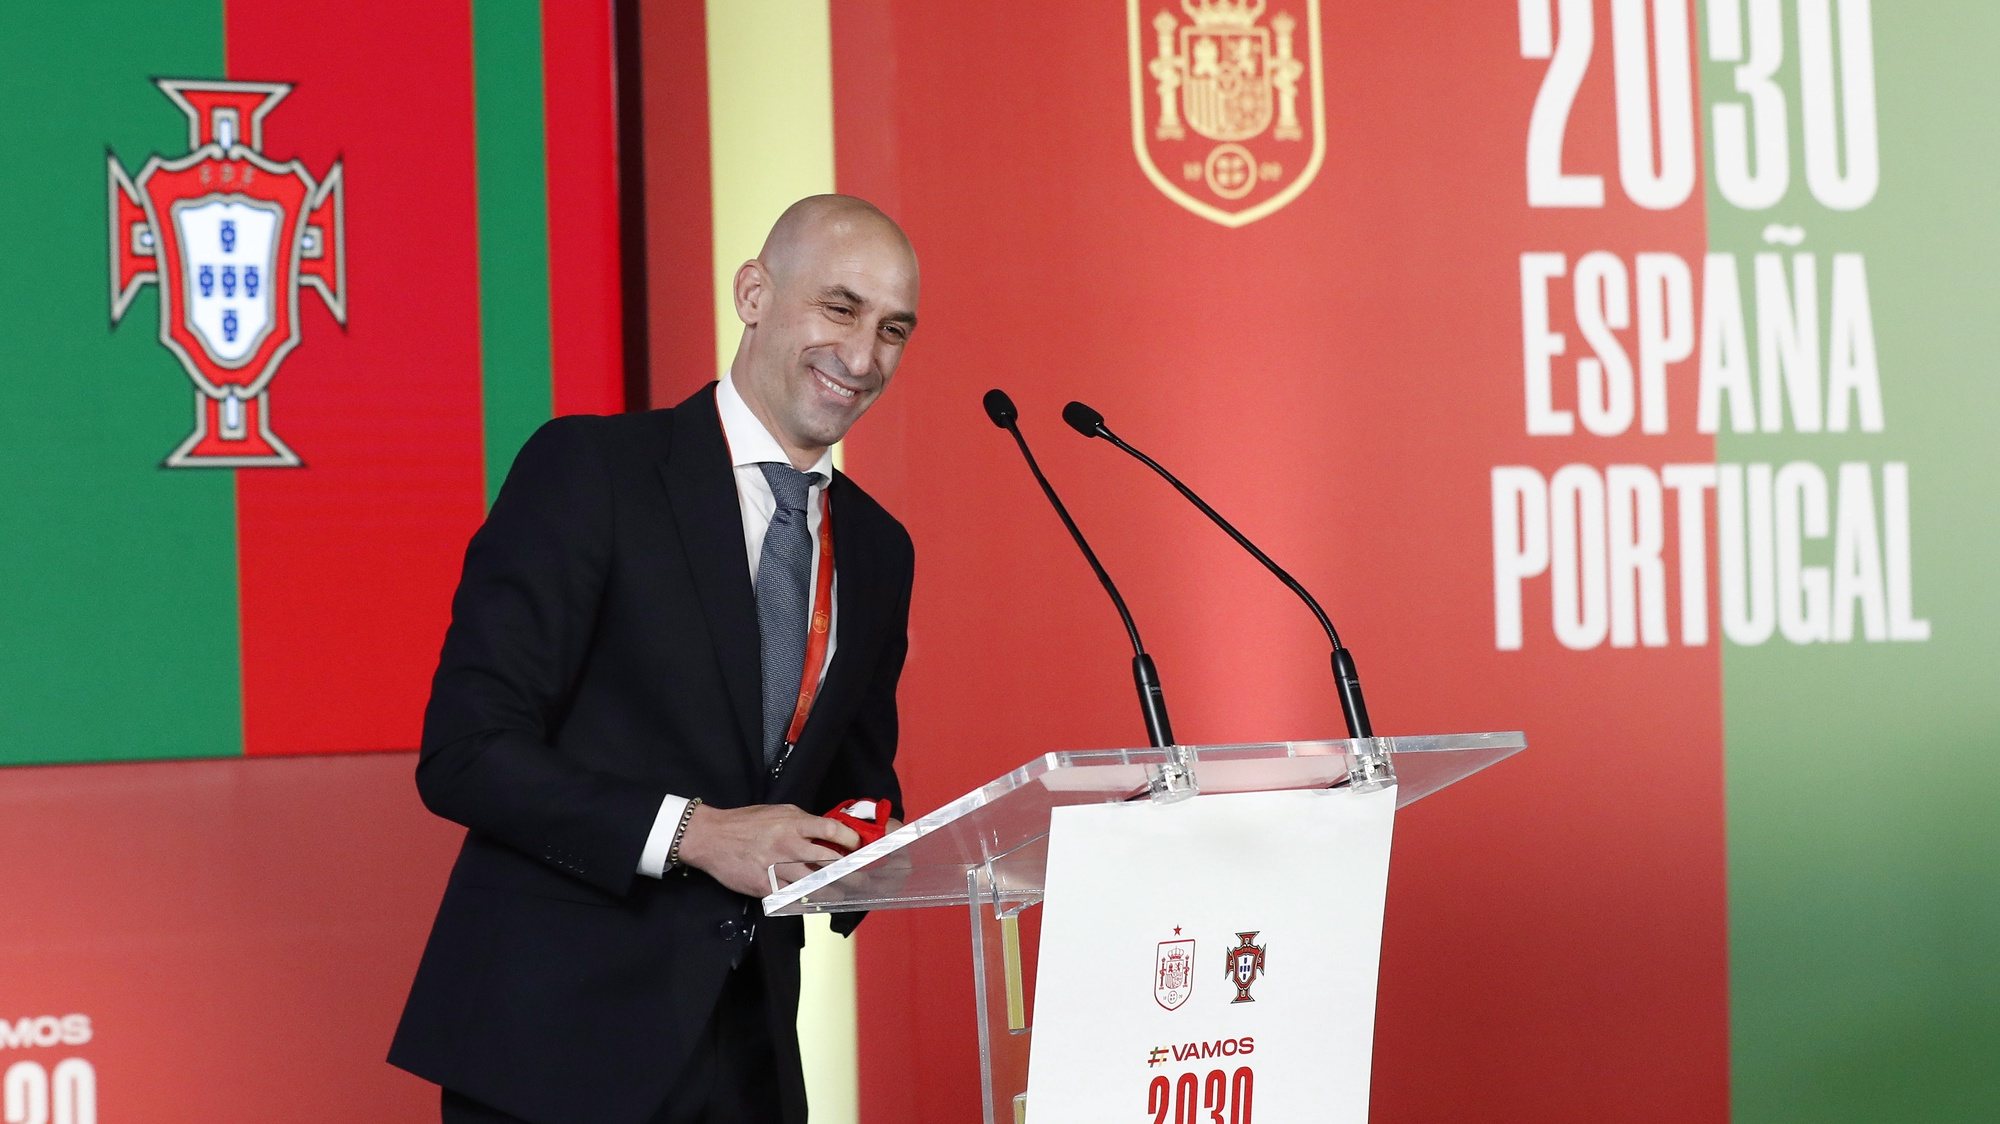 epa09248586 A handout photo made available by Portuguese Football Federation (FPF) show&#039;s President of the Spain Soccer Federation (RFEF), Luis Rubiales during the formalisation of the candidature of the two countries for the 2030 World Cup, Madrid, Spain, 4 de June 2020. The Football Federations of Portugal and Spain today made official their joint bid to host the 2030 FIFA World Cup.  EPA/PEDRO GONZALEZ  HANDOUT EDITORIAL USE ONLY/NO SALES